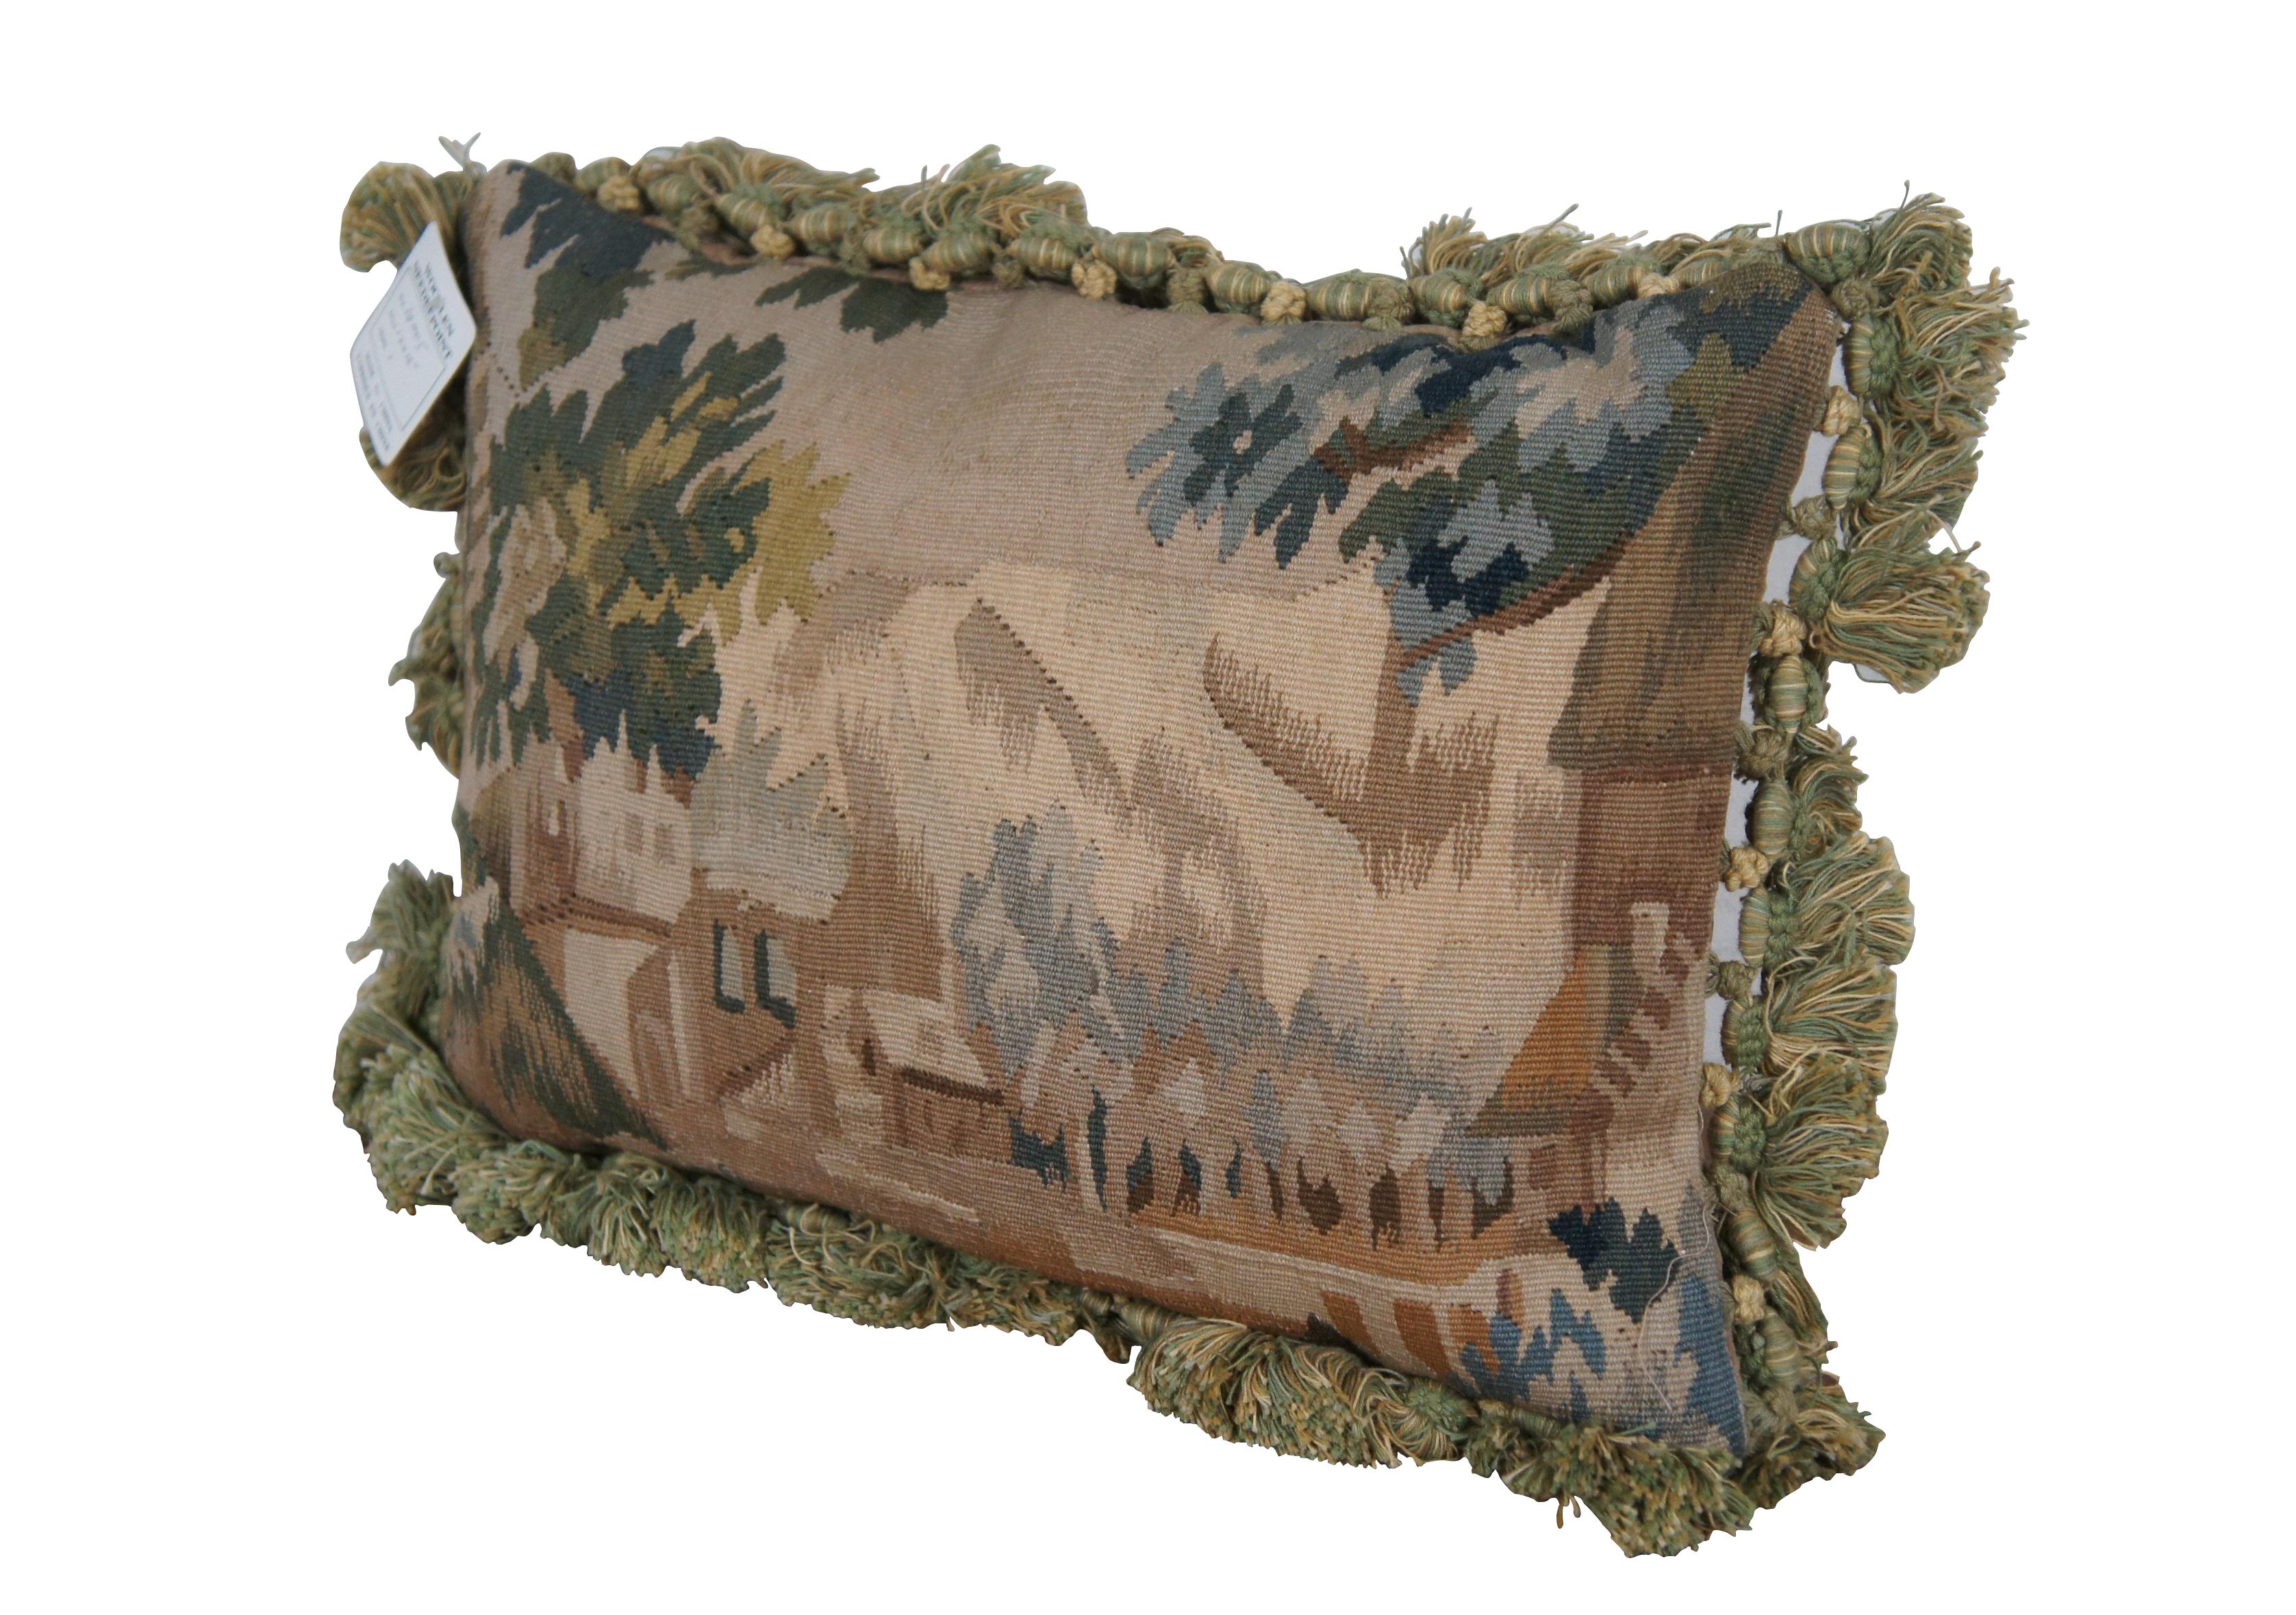 3 Available - 20th century French Aubusson style rectangular throw / lumbar pillow, machine embroidered in wool with a castle peeping through a forested landscape. Down Filled. Green and gold tassel trim. Light brown velour back with zipper closure.